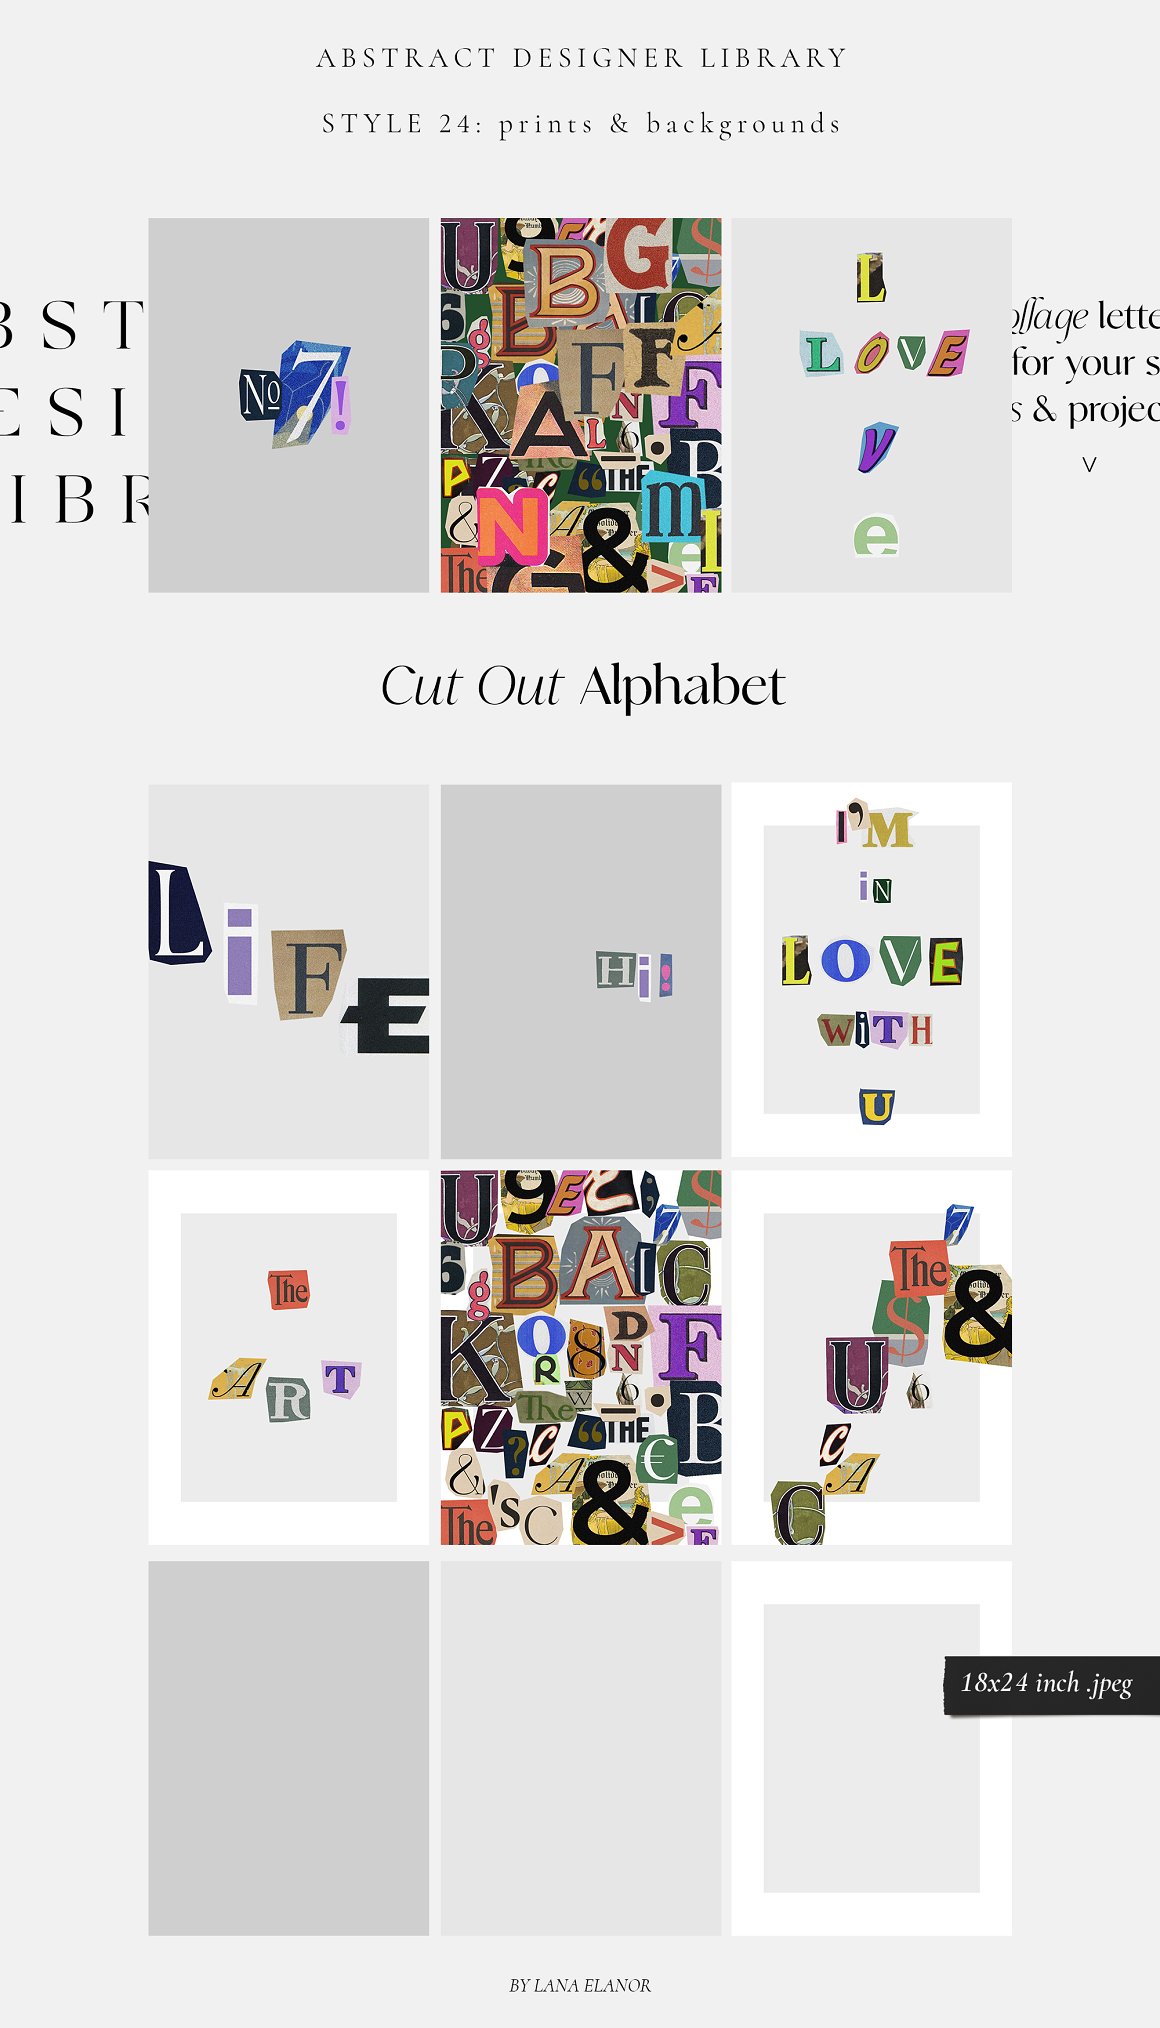 Cut out alphabet library on a gray background.